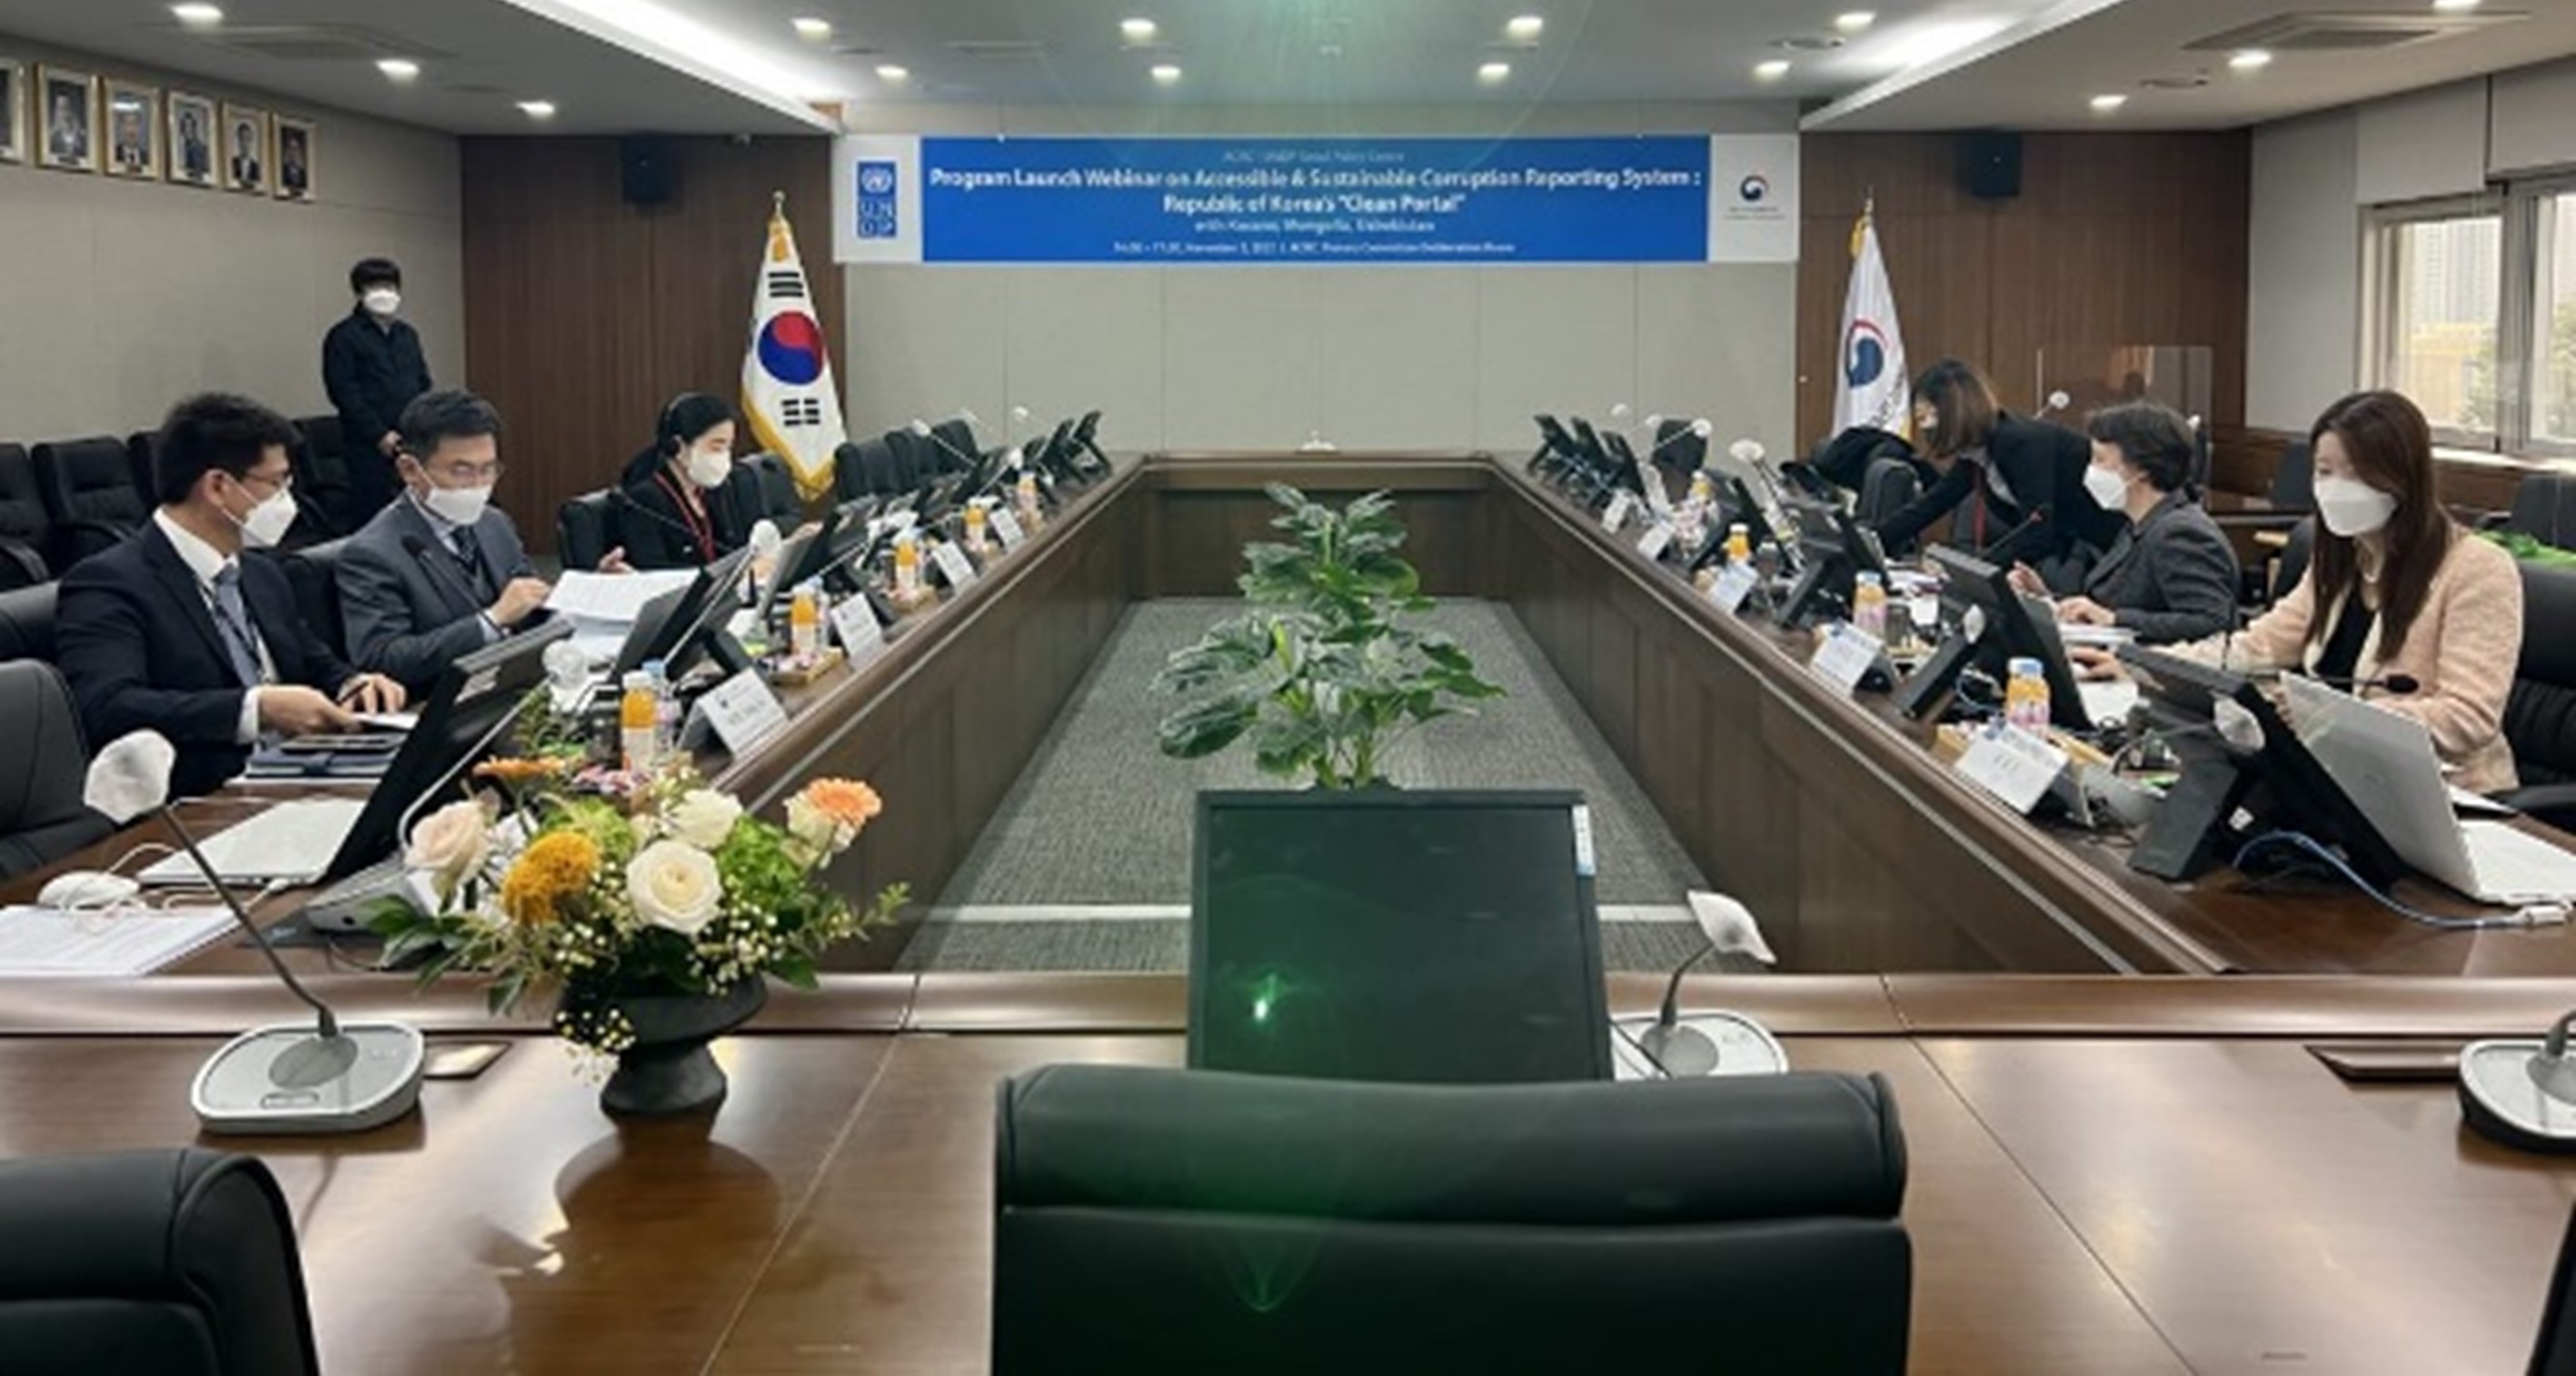 Picture of participants seated in a meeting venue